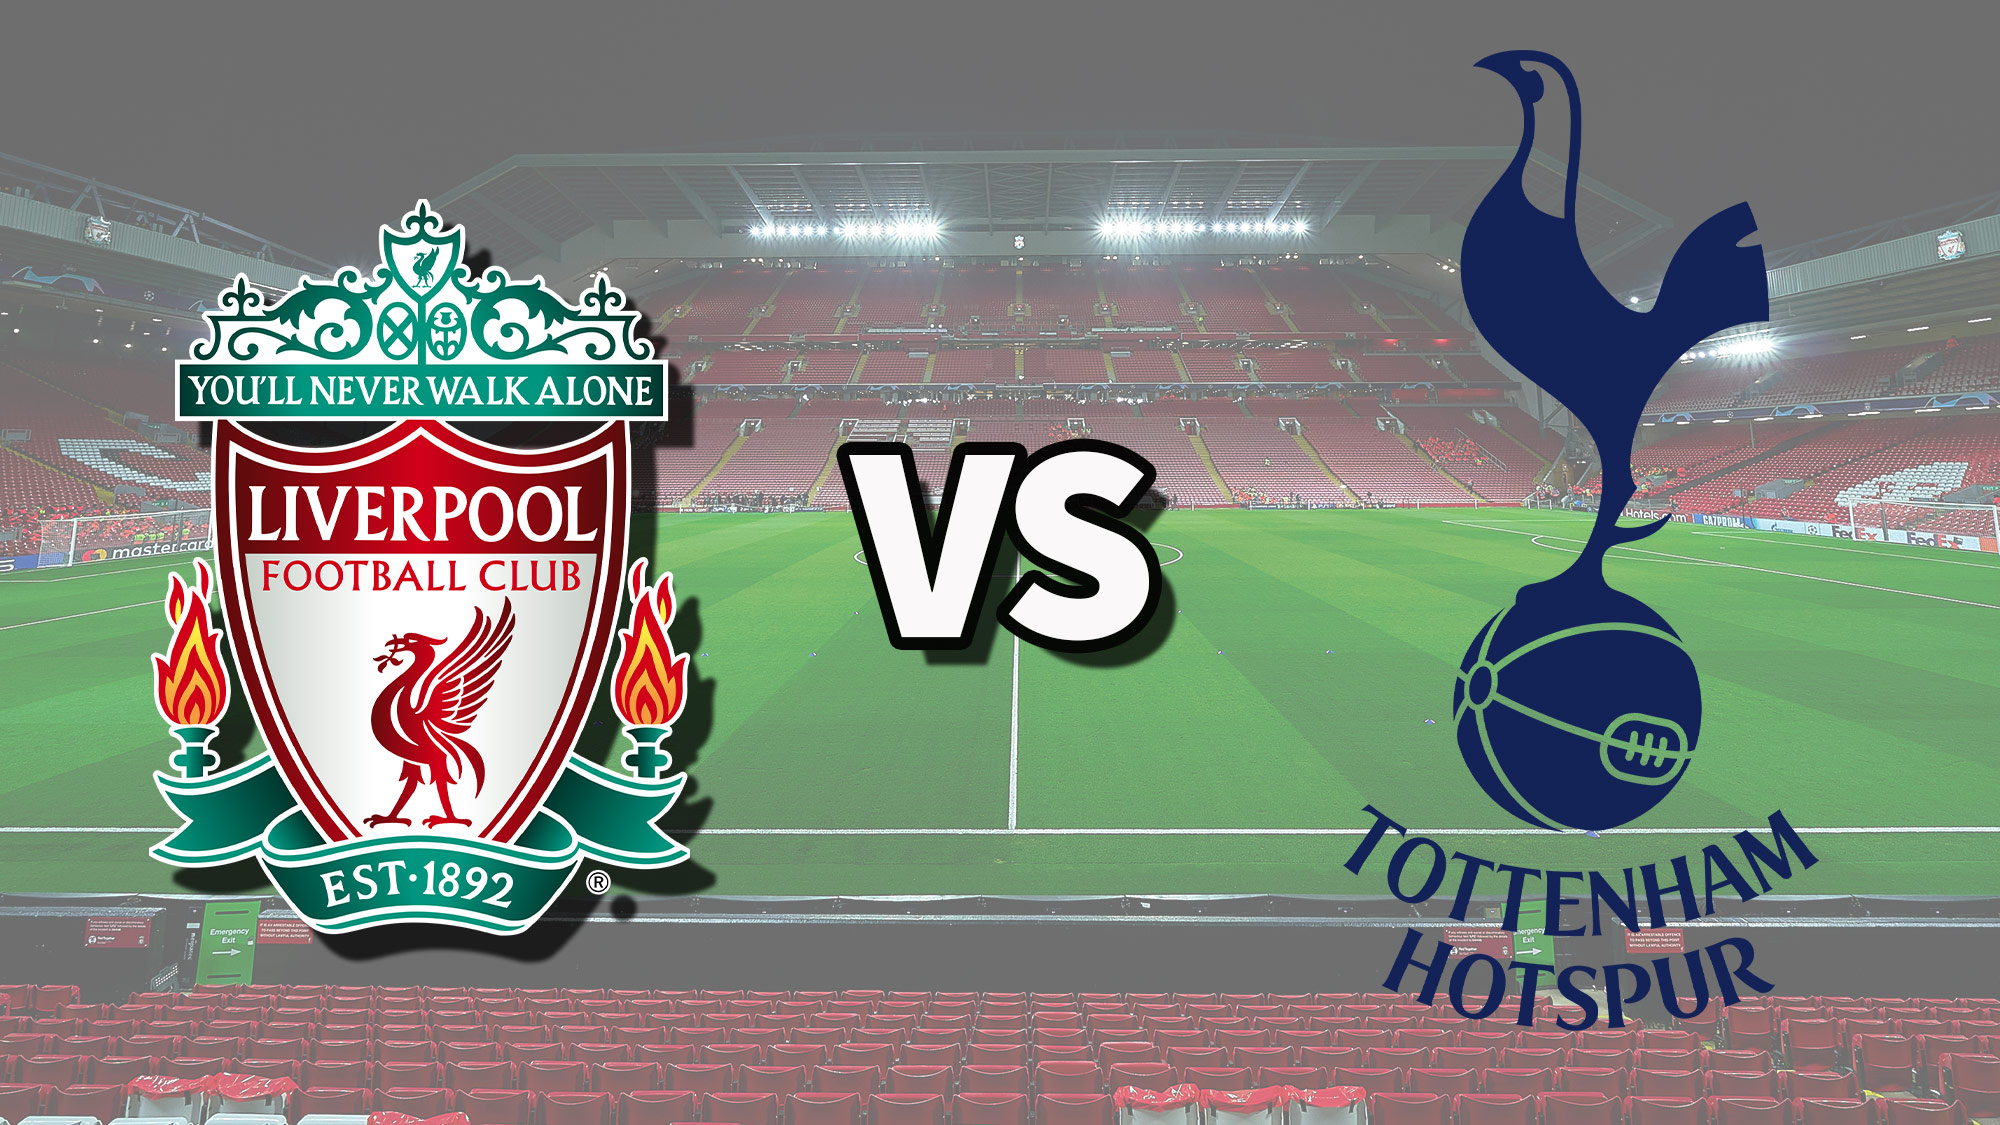 Liverpool vs. Tottenham Hotspur: Match Thread and How to Watch